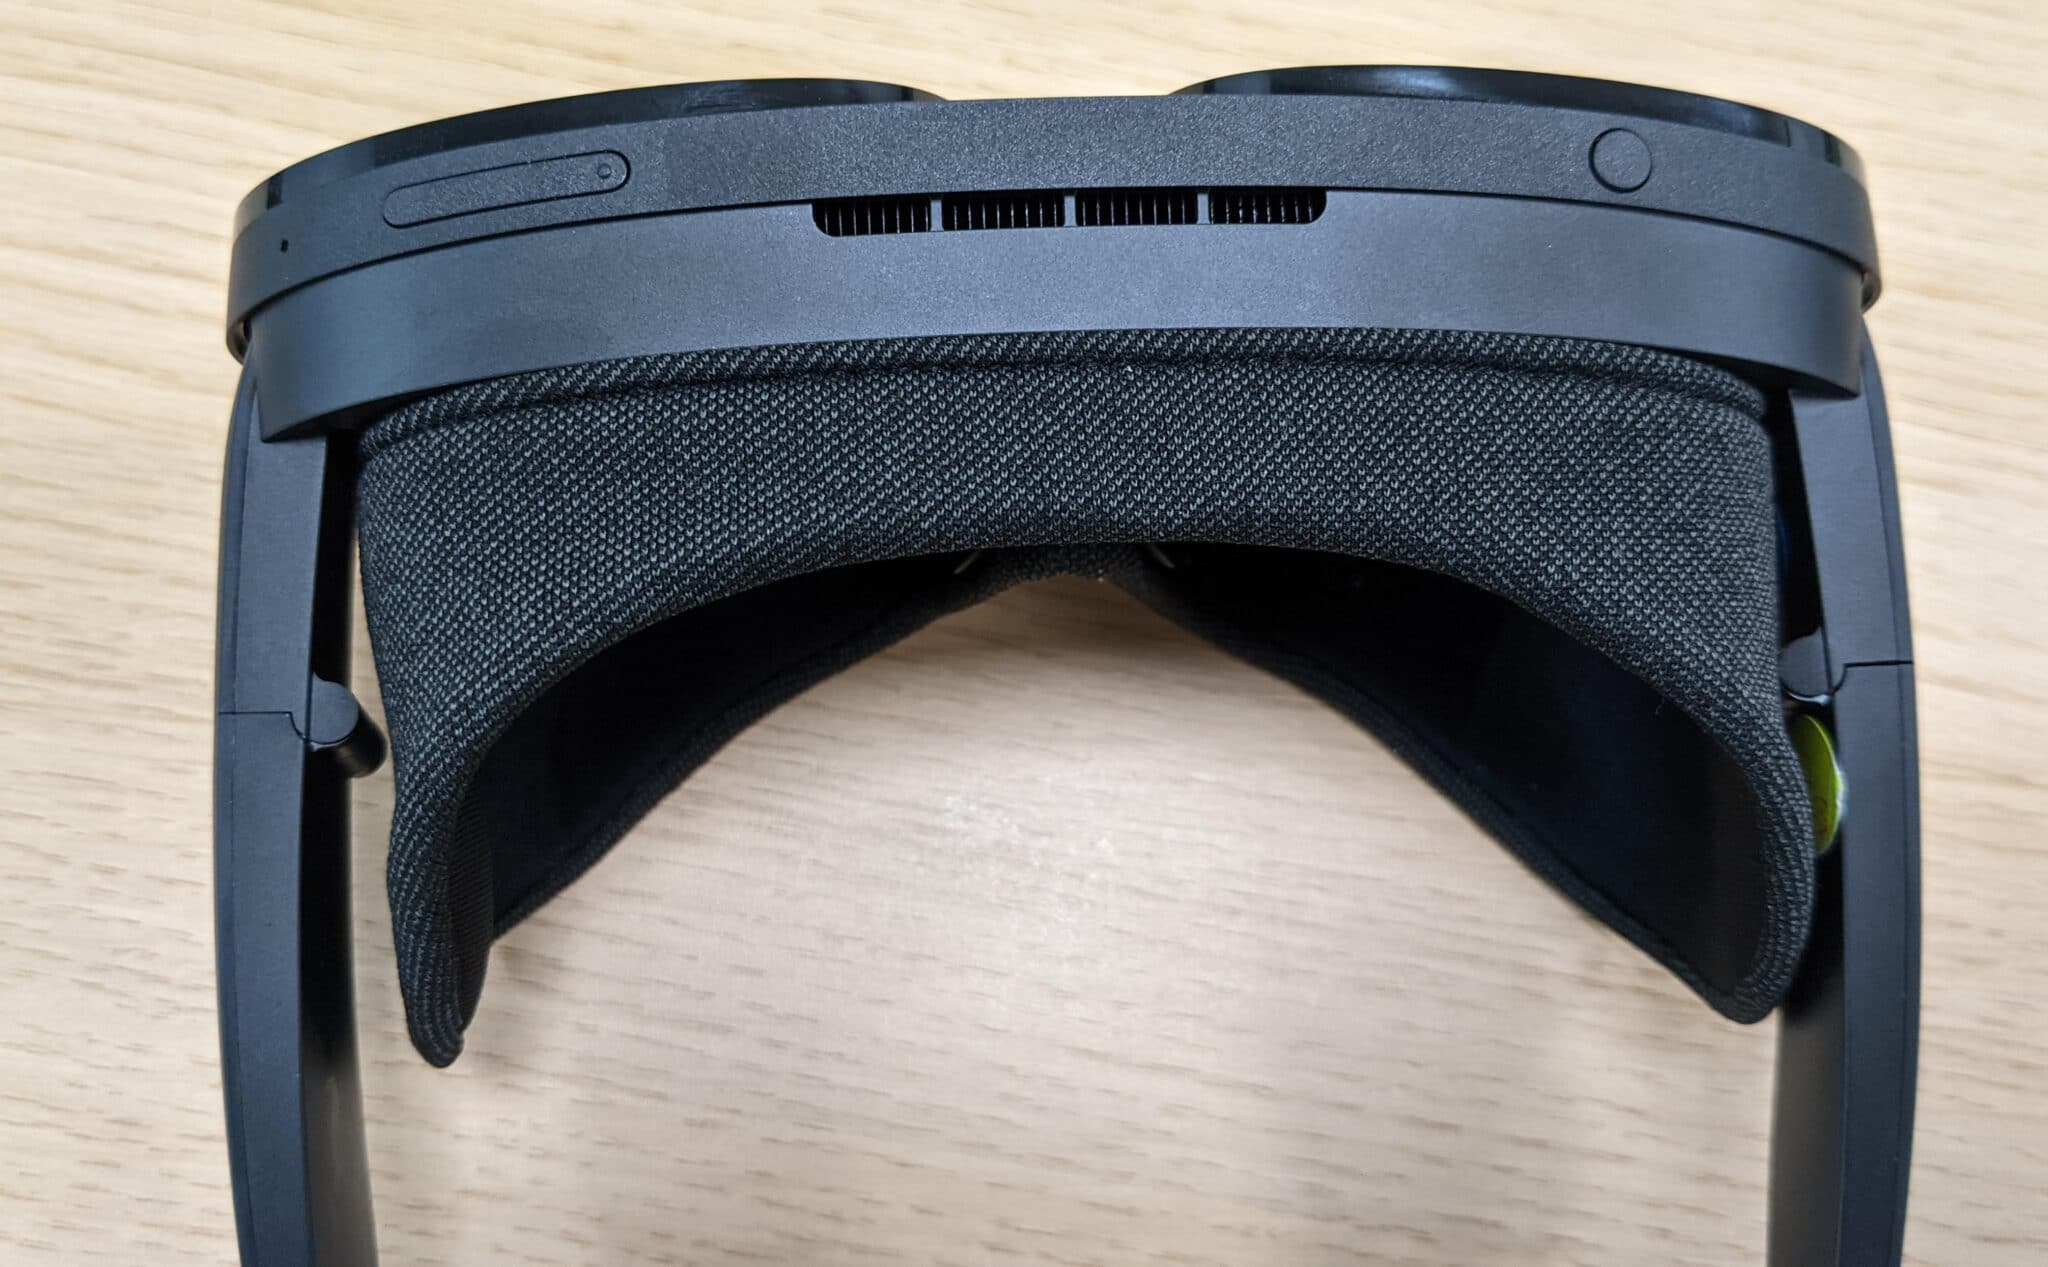 Hands on: Vive Flow Review